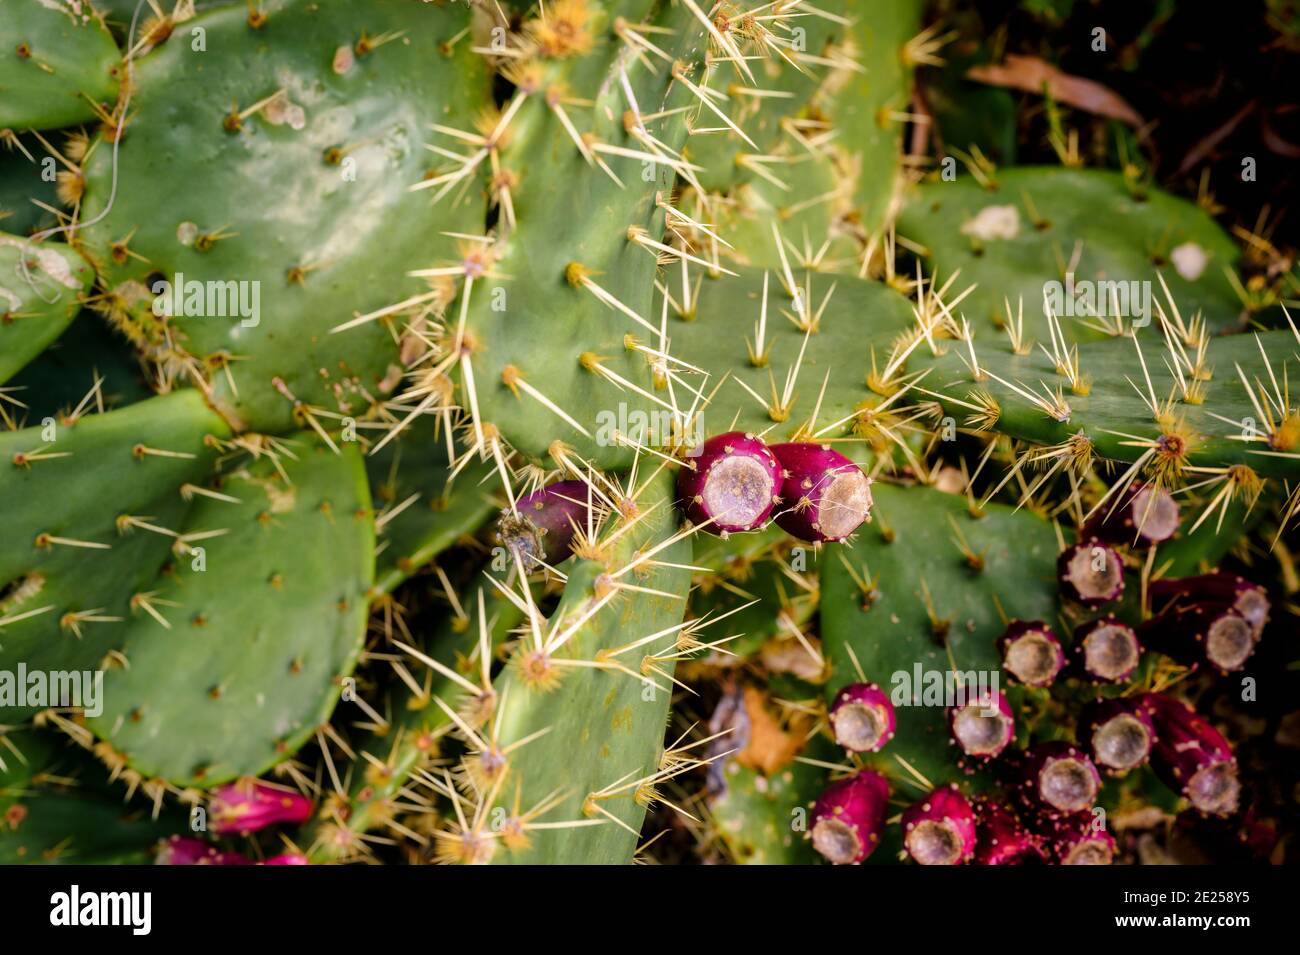 Opuntia, or the prickly pear cactus, at Britain's hottest garden, the Ventnor Botanic Garden on the Isle of Wight, UK. Stock Photo